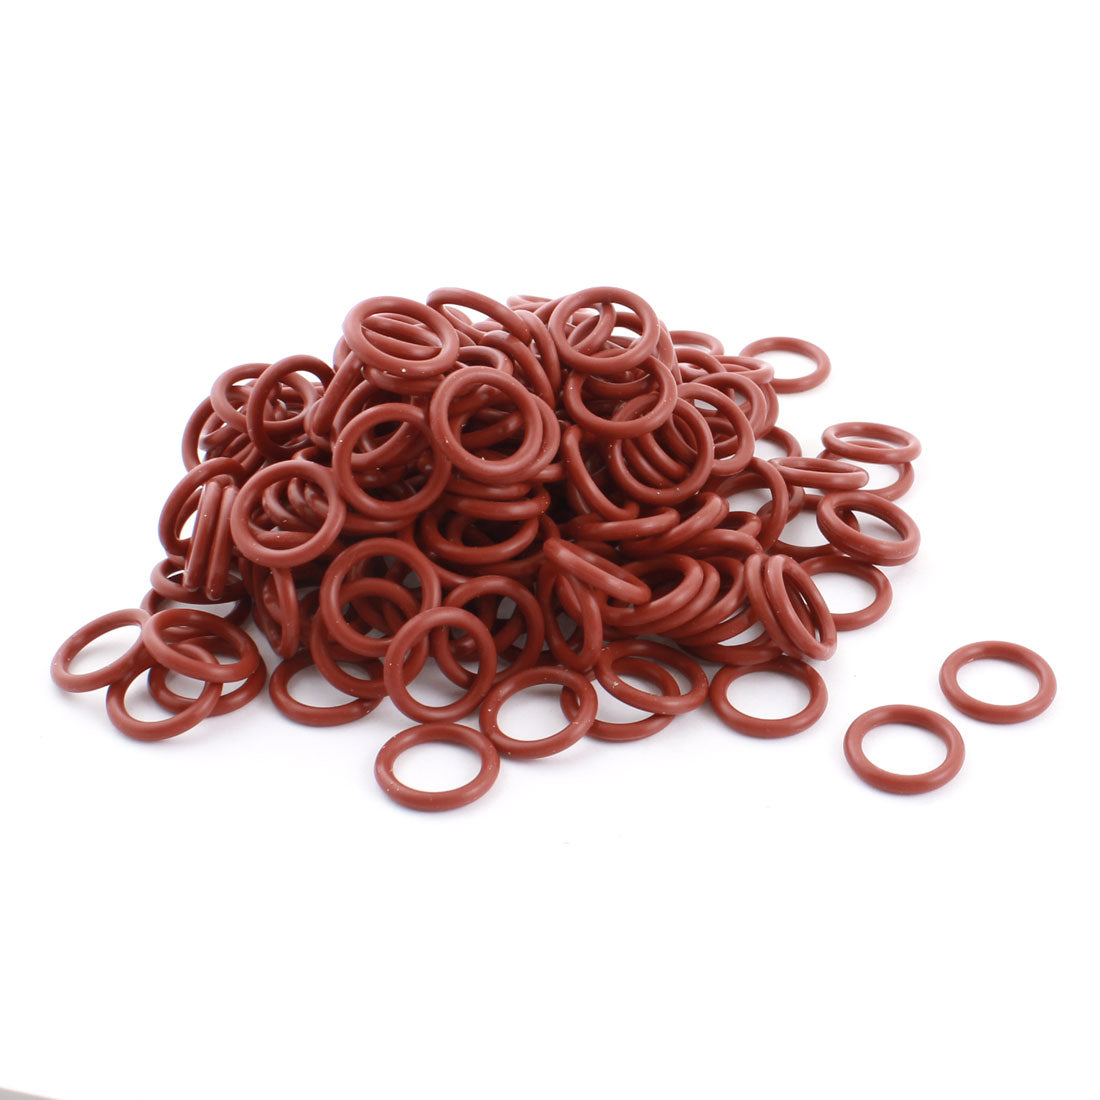 uxcell Uxcell 200Pcs 20mm x 14mm x 3mm Red Rubber RC Airplane Aircraft Model Motor Oil Seal O Ring Gasket Spacer Washer